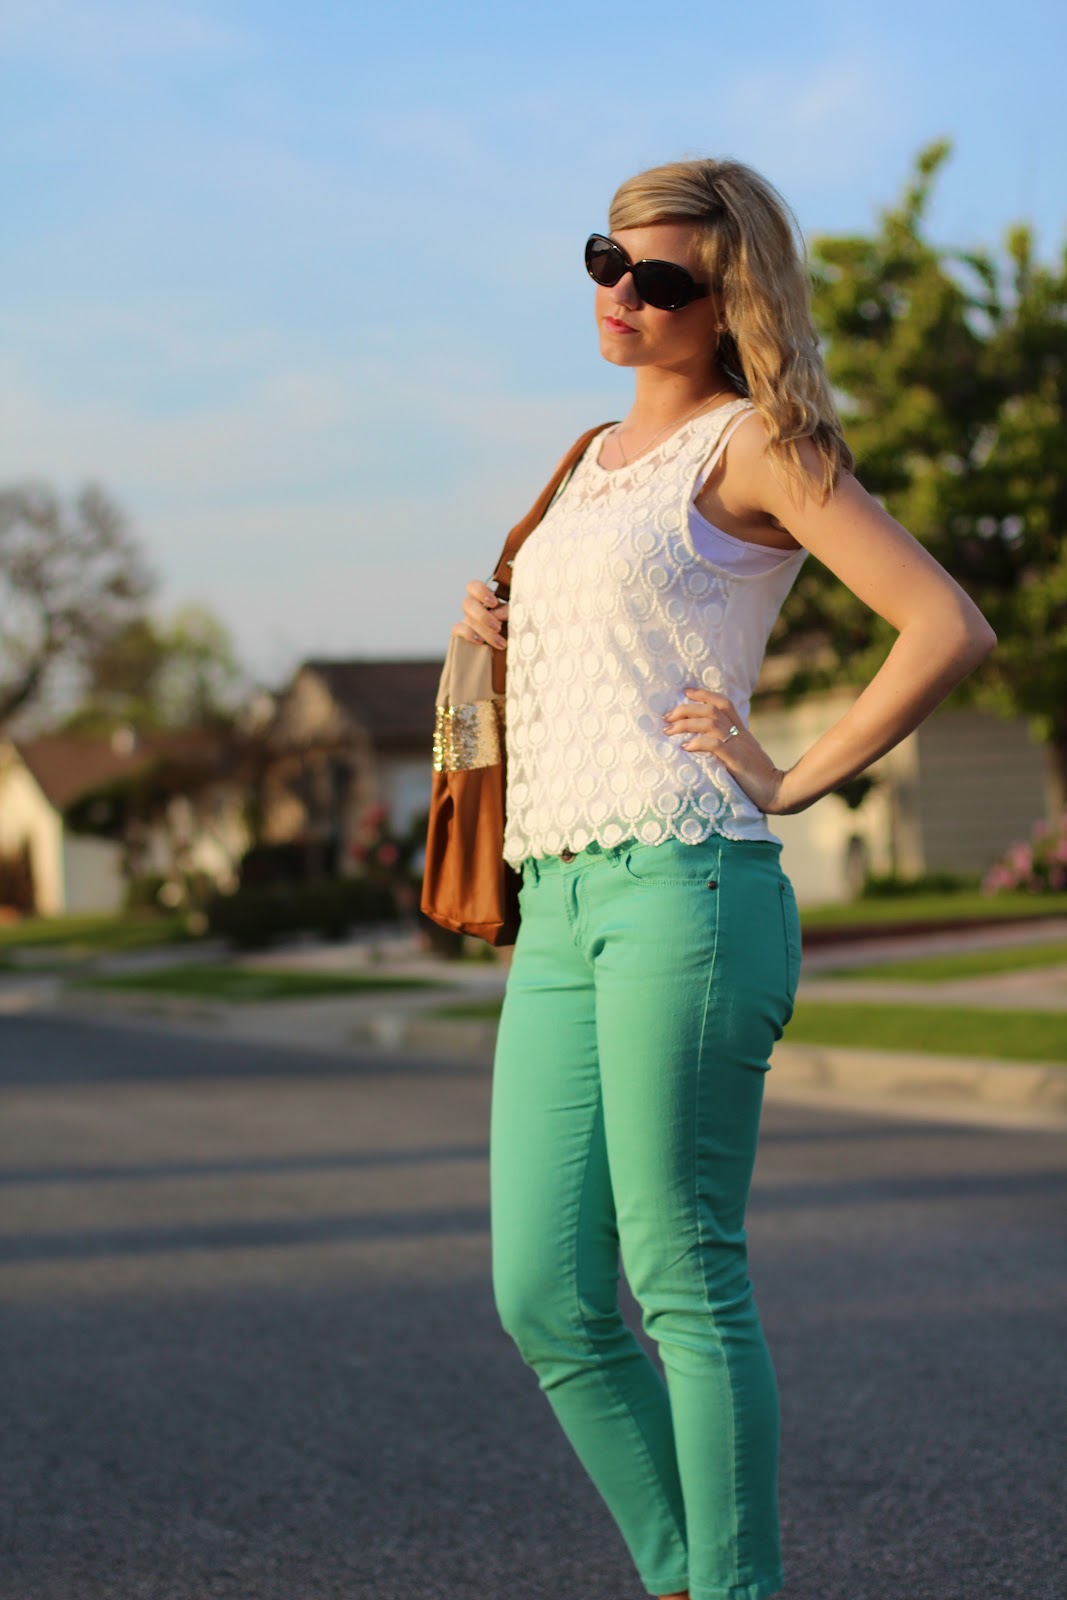 Living in Color | A Life & Style Blog: Outfit Post: Home